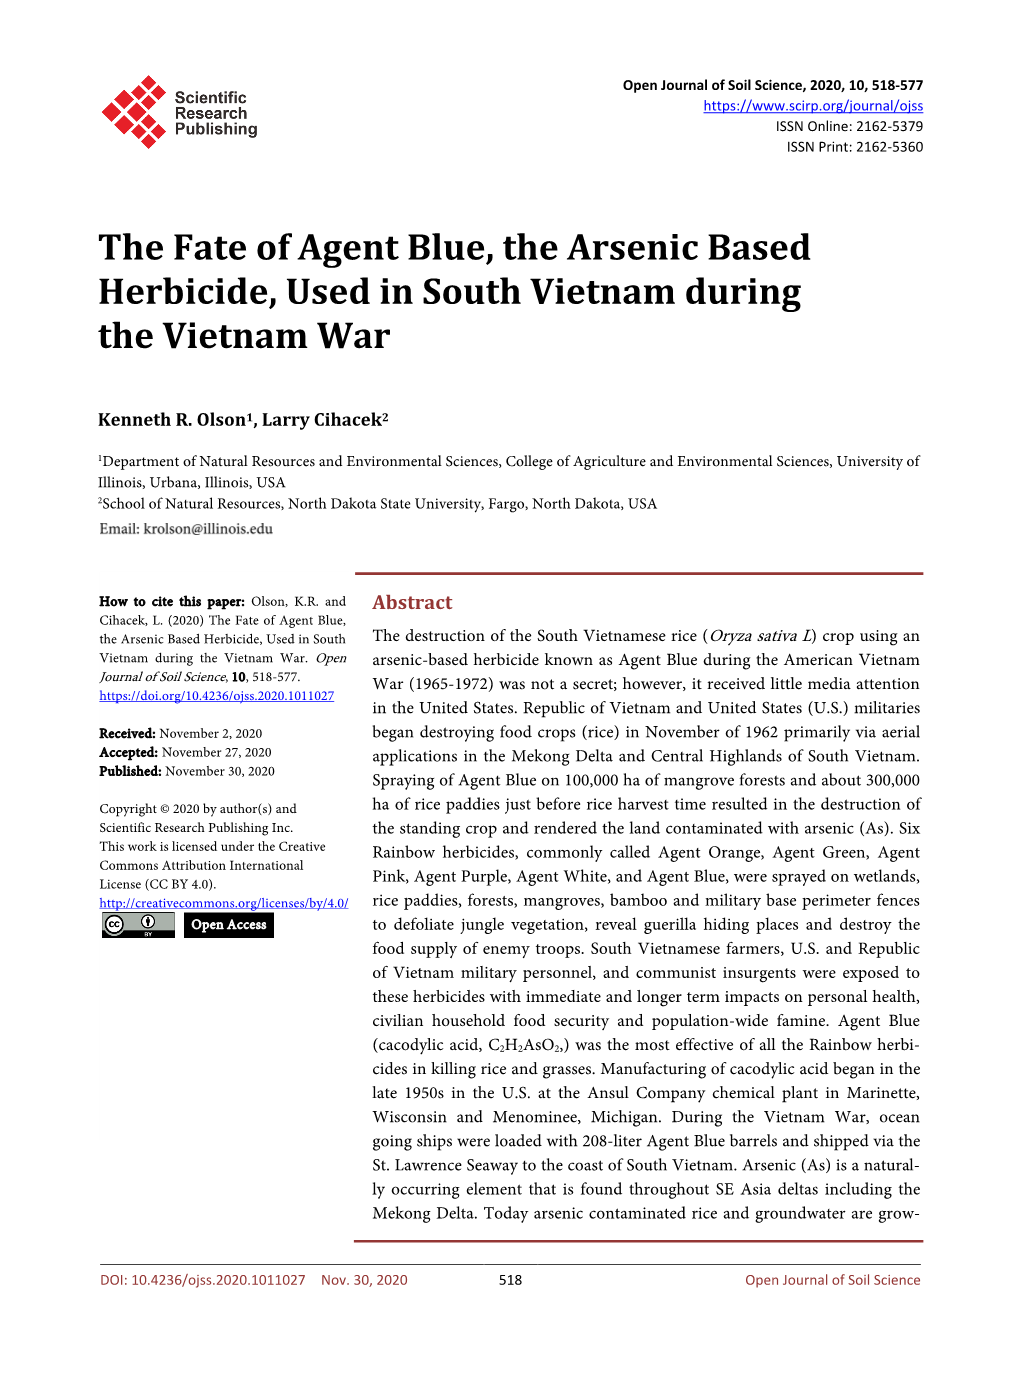 The Fate of Agent Blue, the Arsenic Based Herbicide, Used in South Vietnam During the Vietnam War